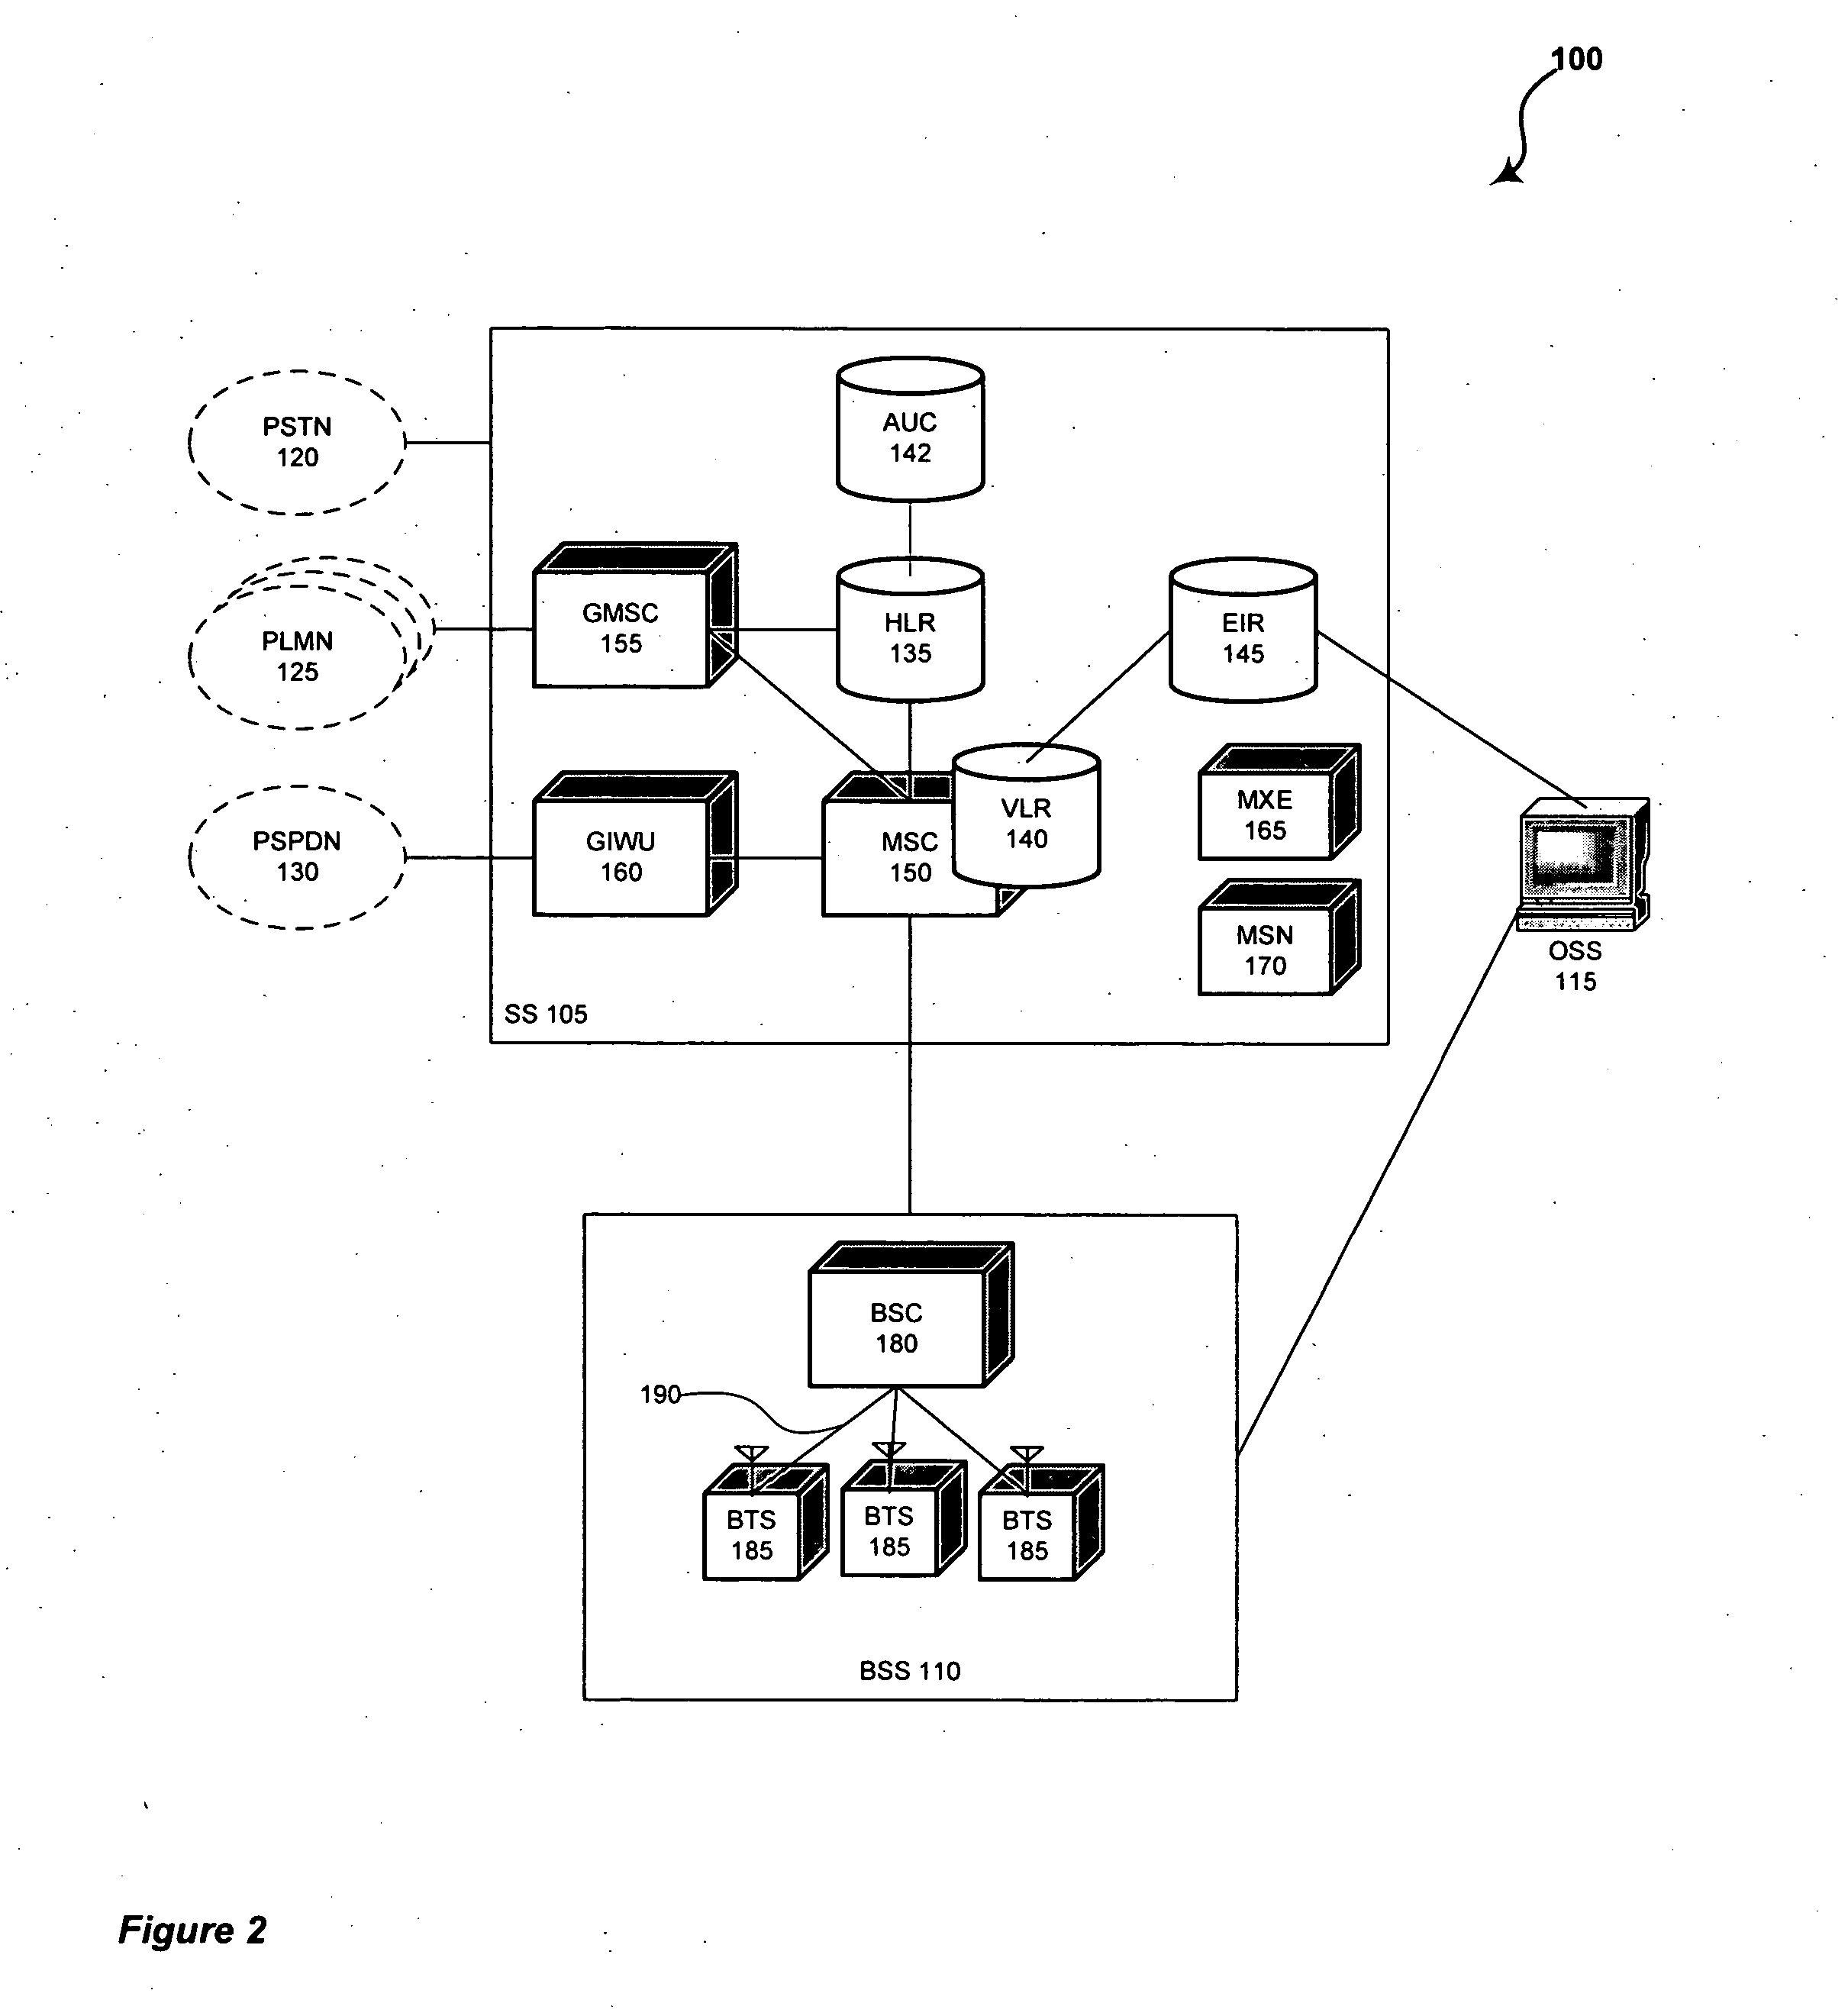 Systems and methods for implementing fully redundant antenna hopping with multi-carrier power amplifiers and combining schemes within a base station